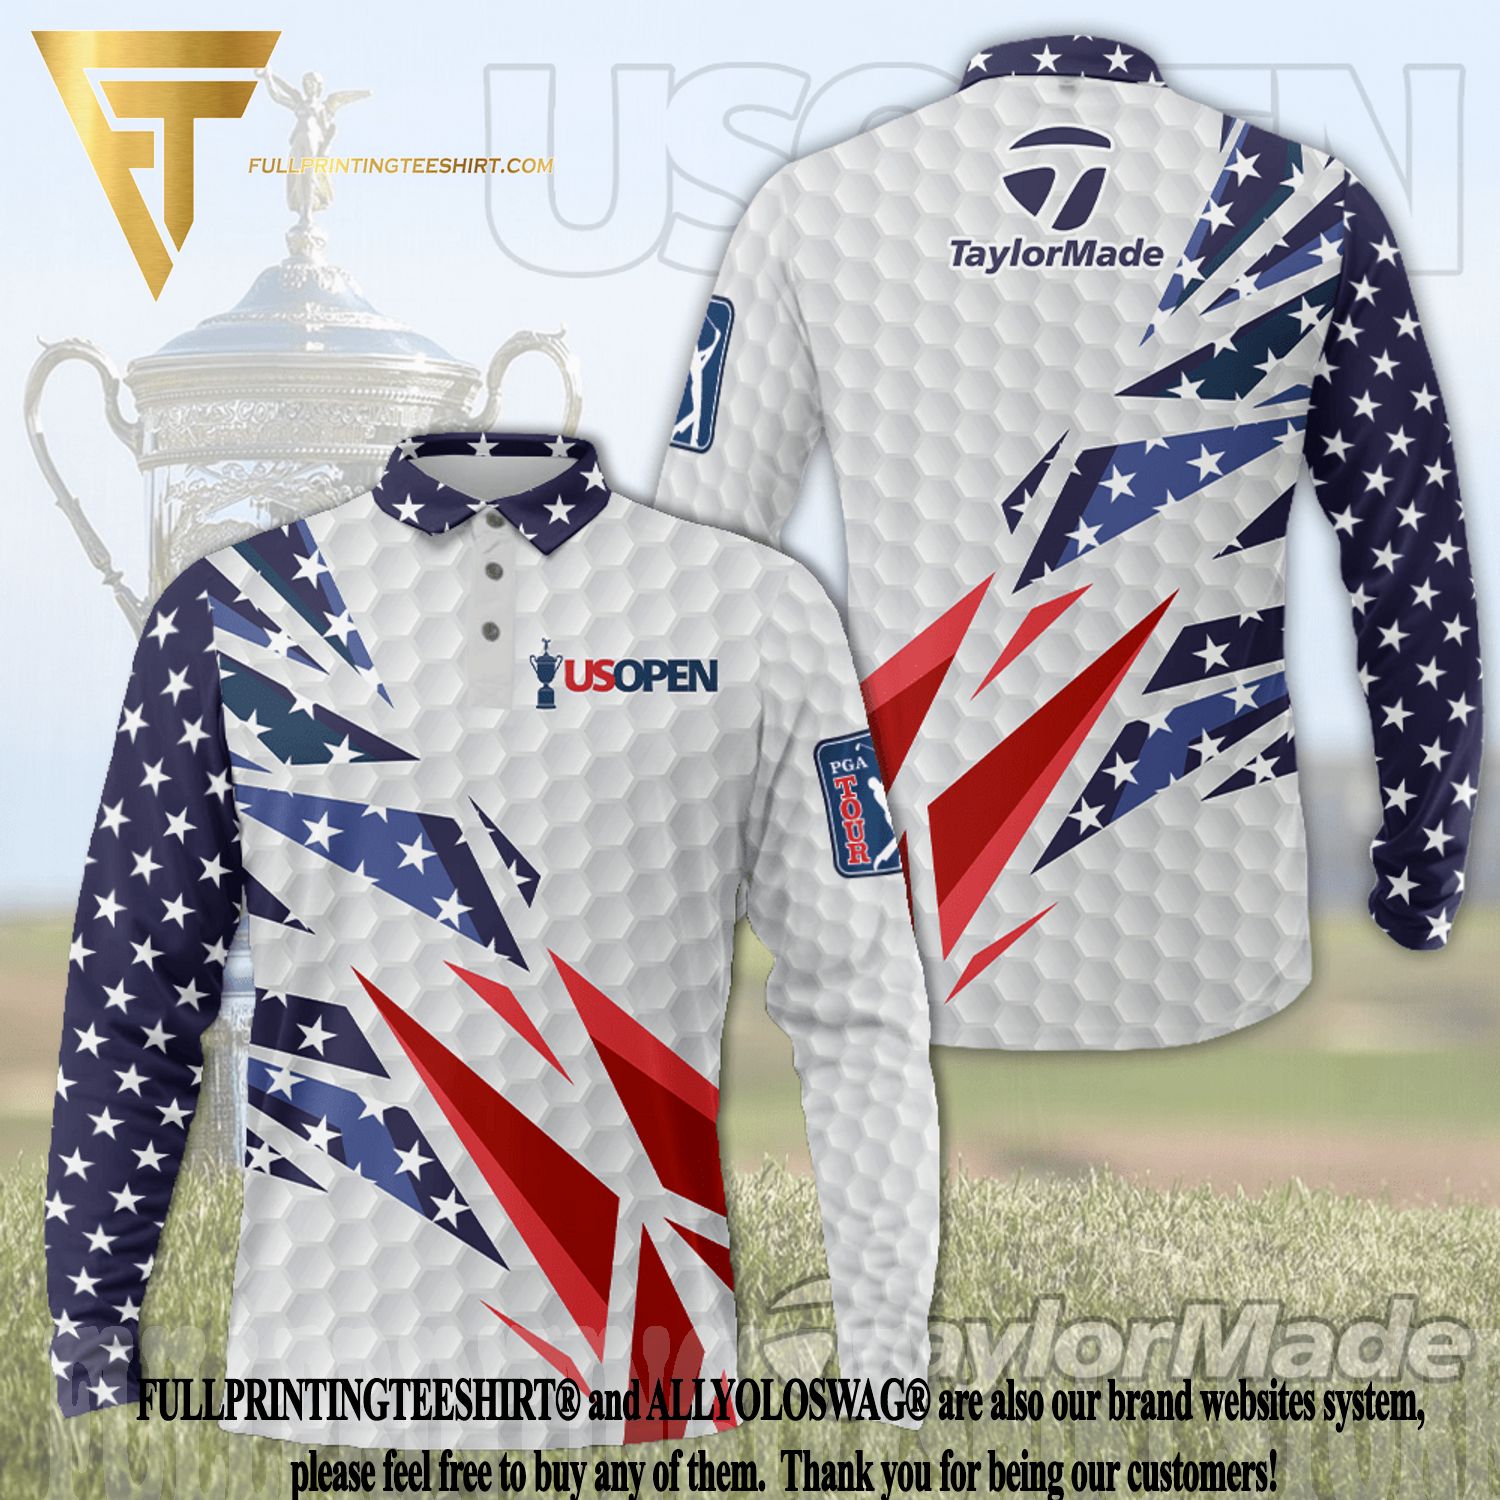 Top-selling Item] TaylorMade x US Open Cup 48 Hot Version All Over